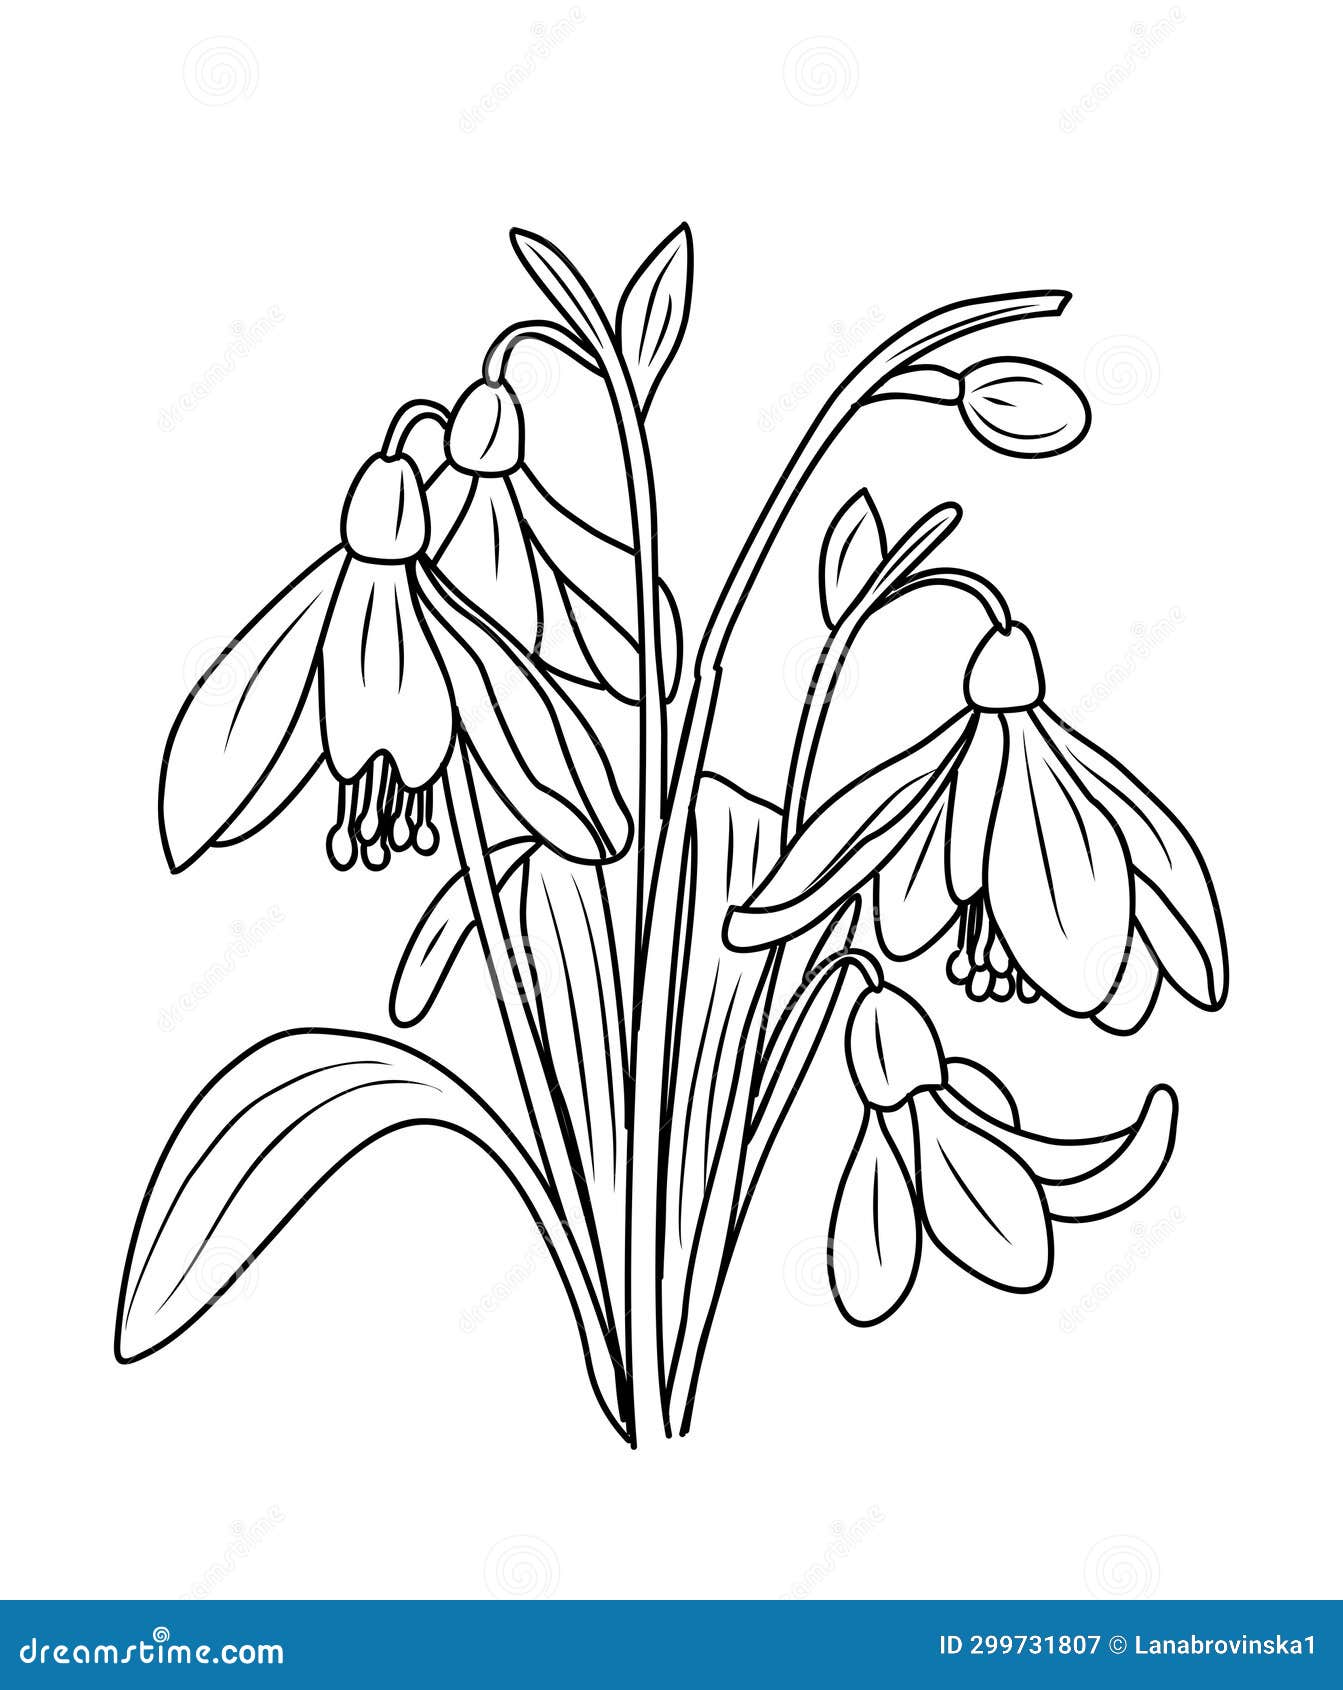 Fine line style snowdrop flower tattoo placed on the